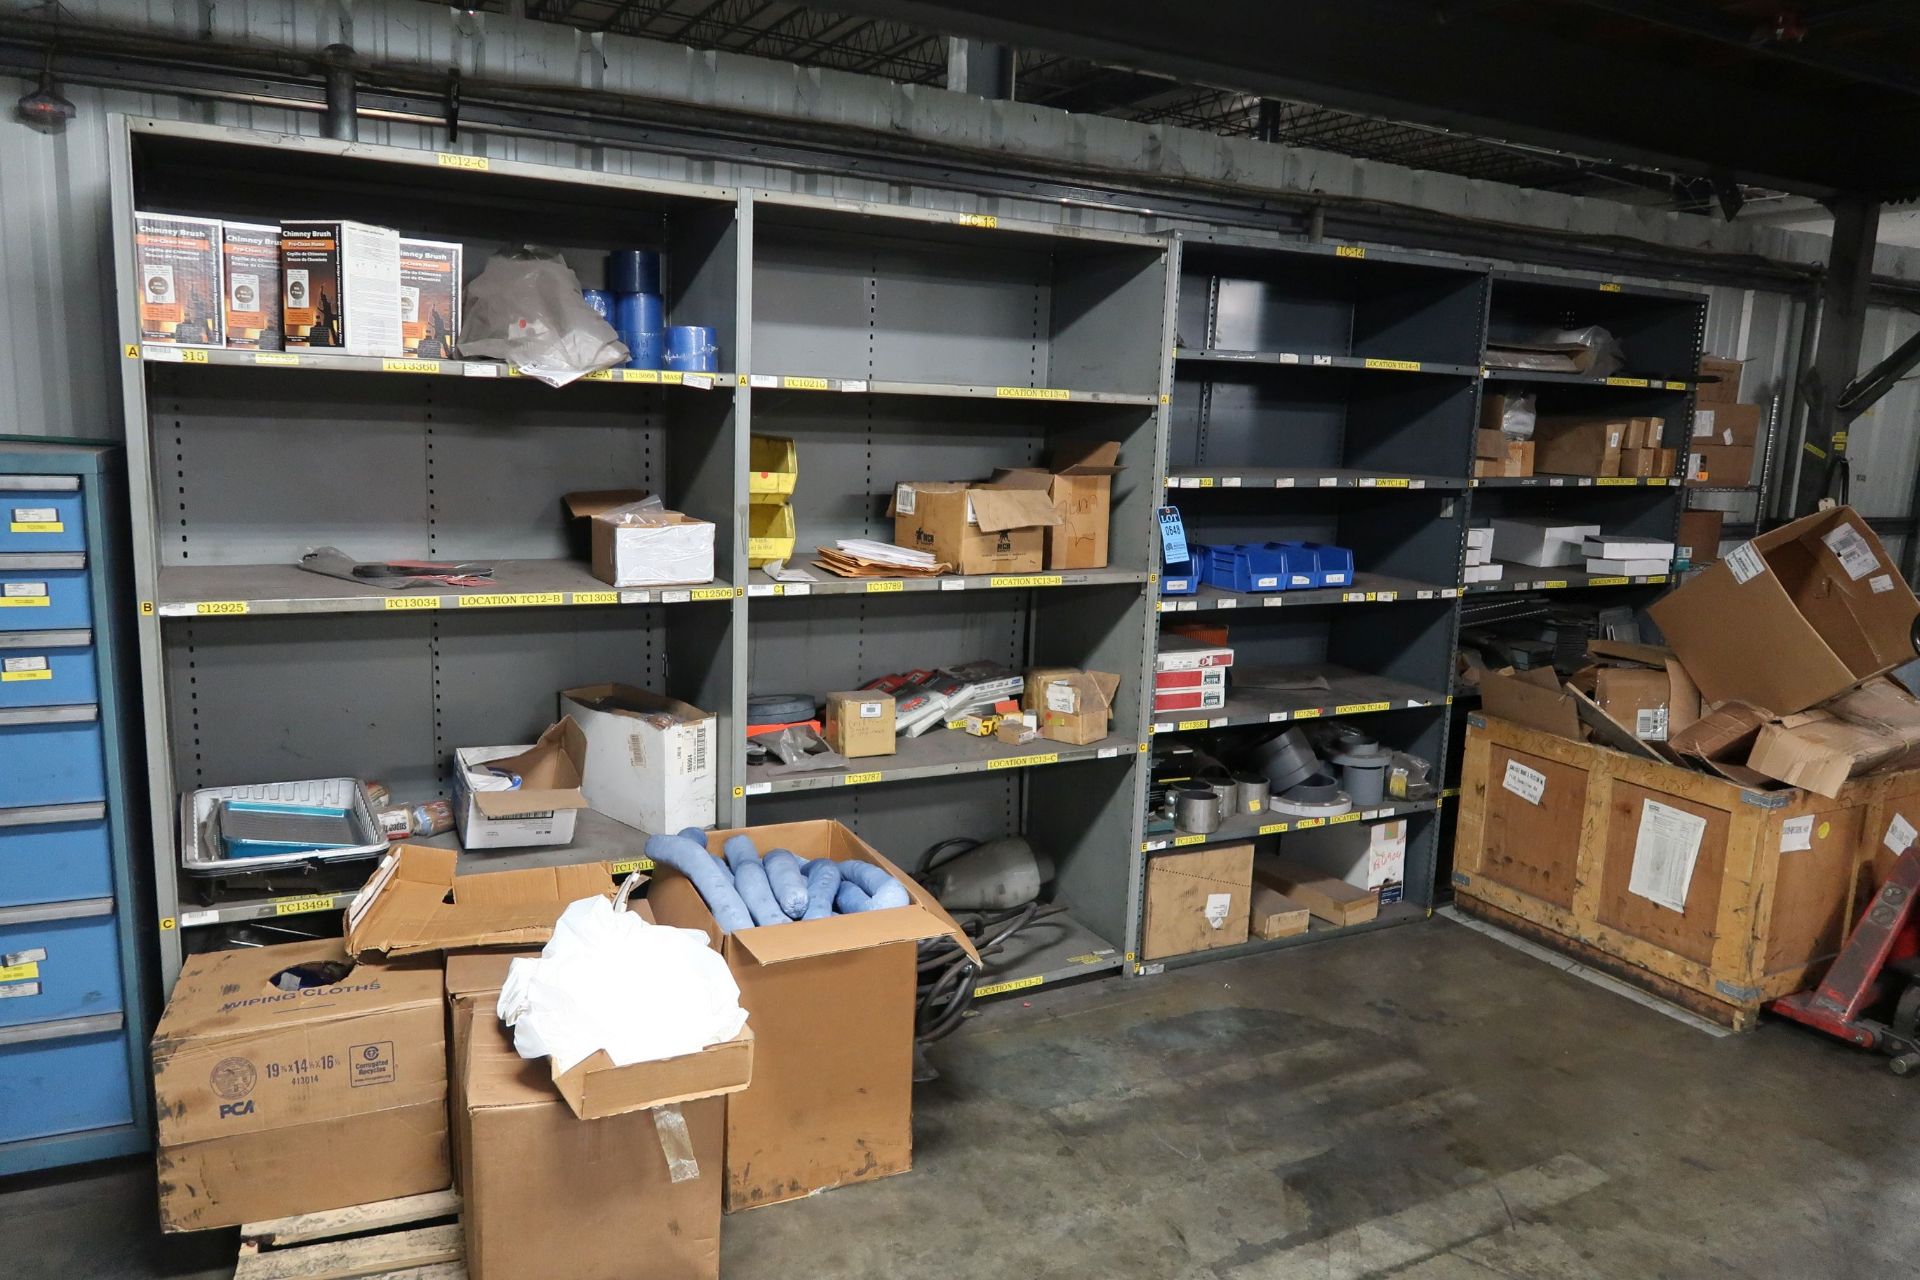 (LOT) GREY SHELVING (4) AND METRO RACK WITH CONTENTS - MAINTENANCE **LOADING PRICE DUE TO ERRA - $